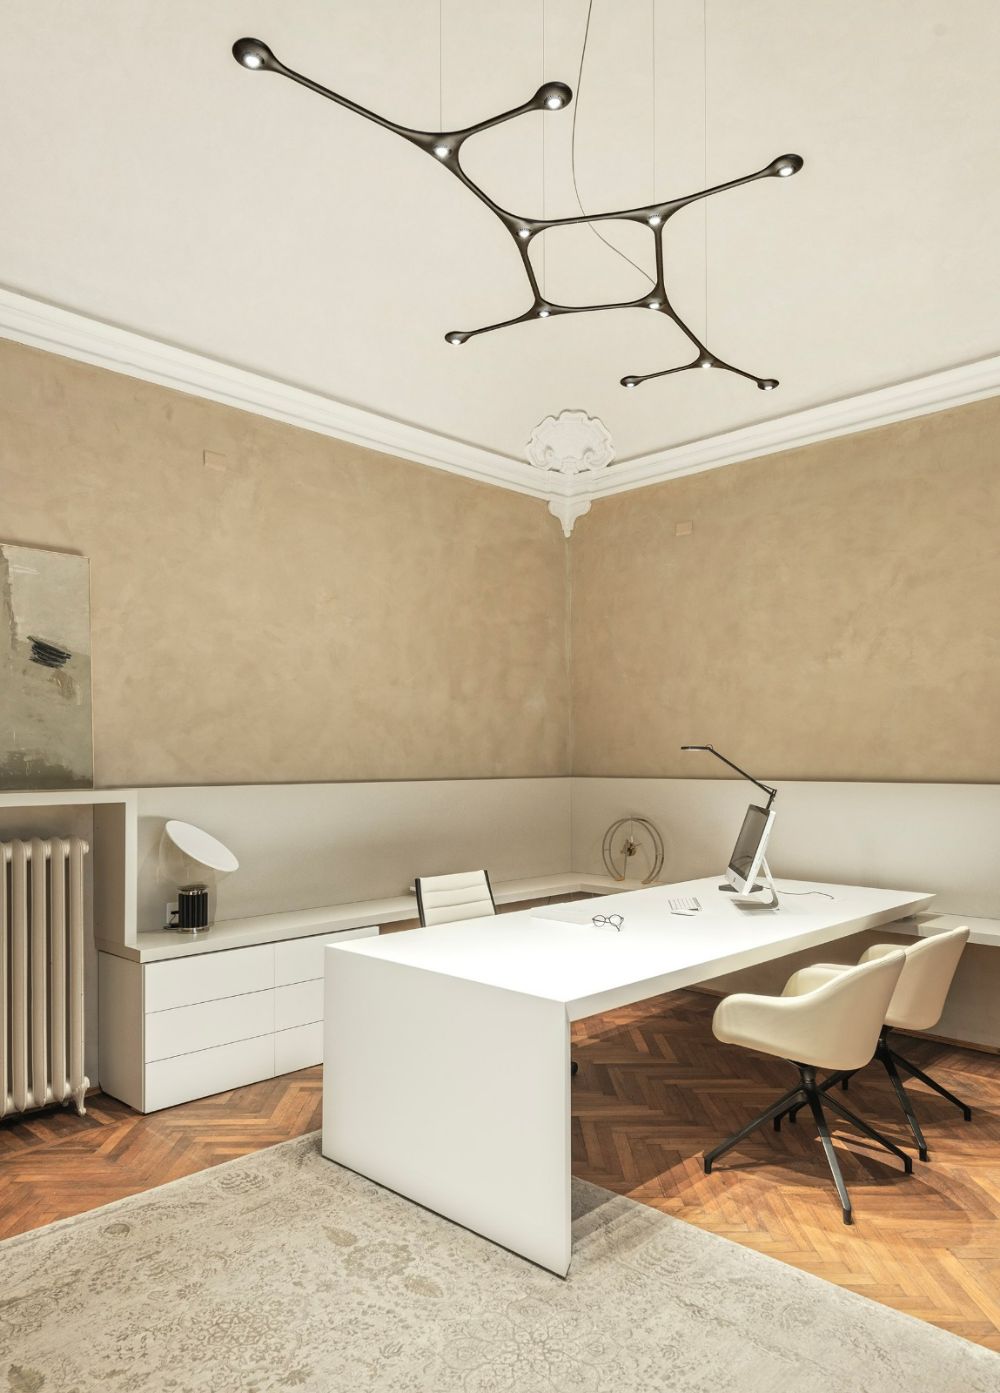 Office In Piacenza Italy Featuring Carbon Light By Tokio Project Designers Guglielmetti Interior 5, Design Authority